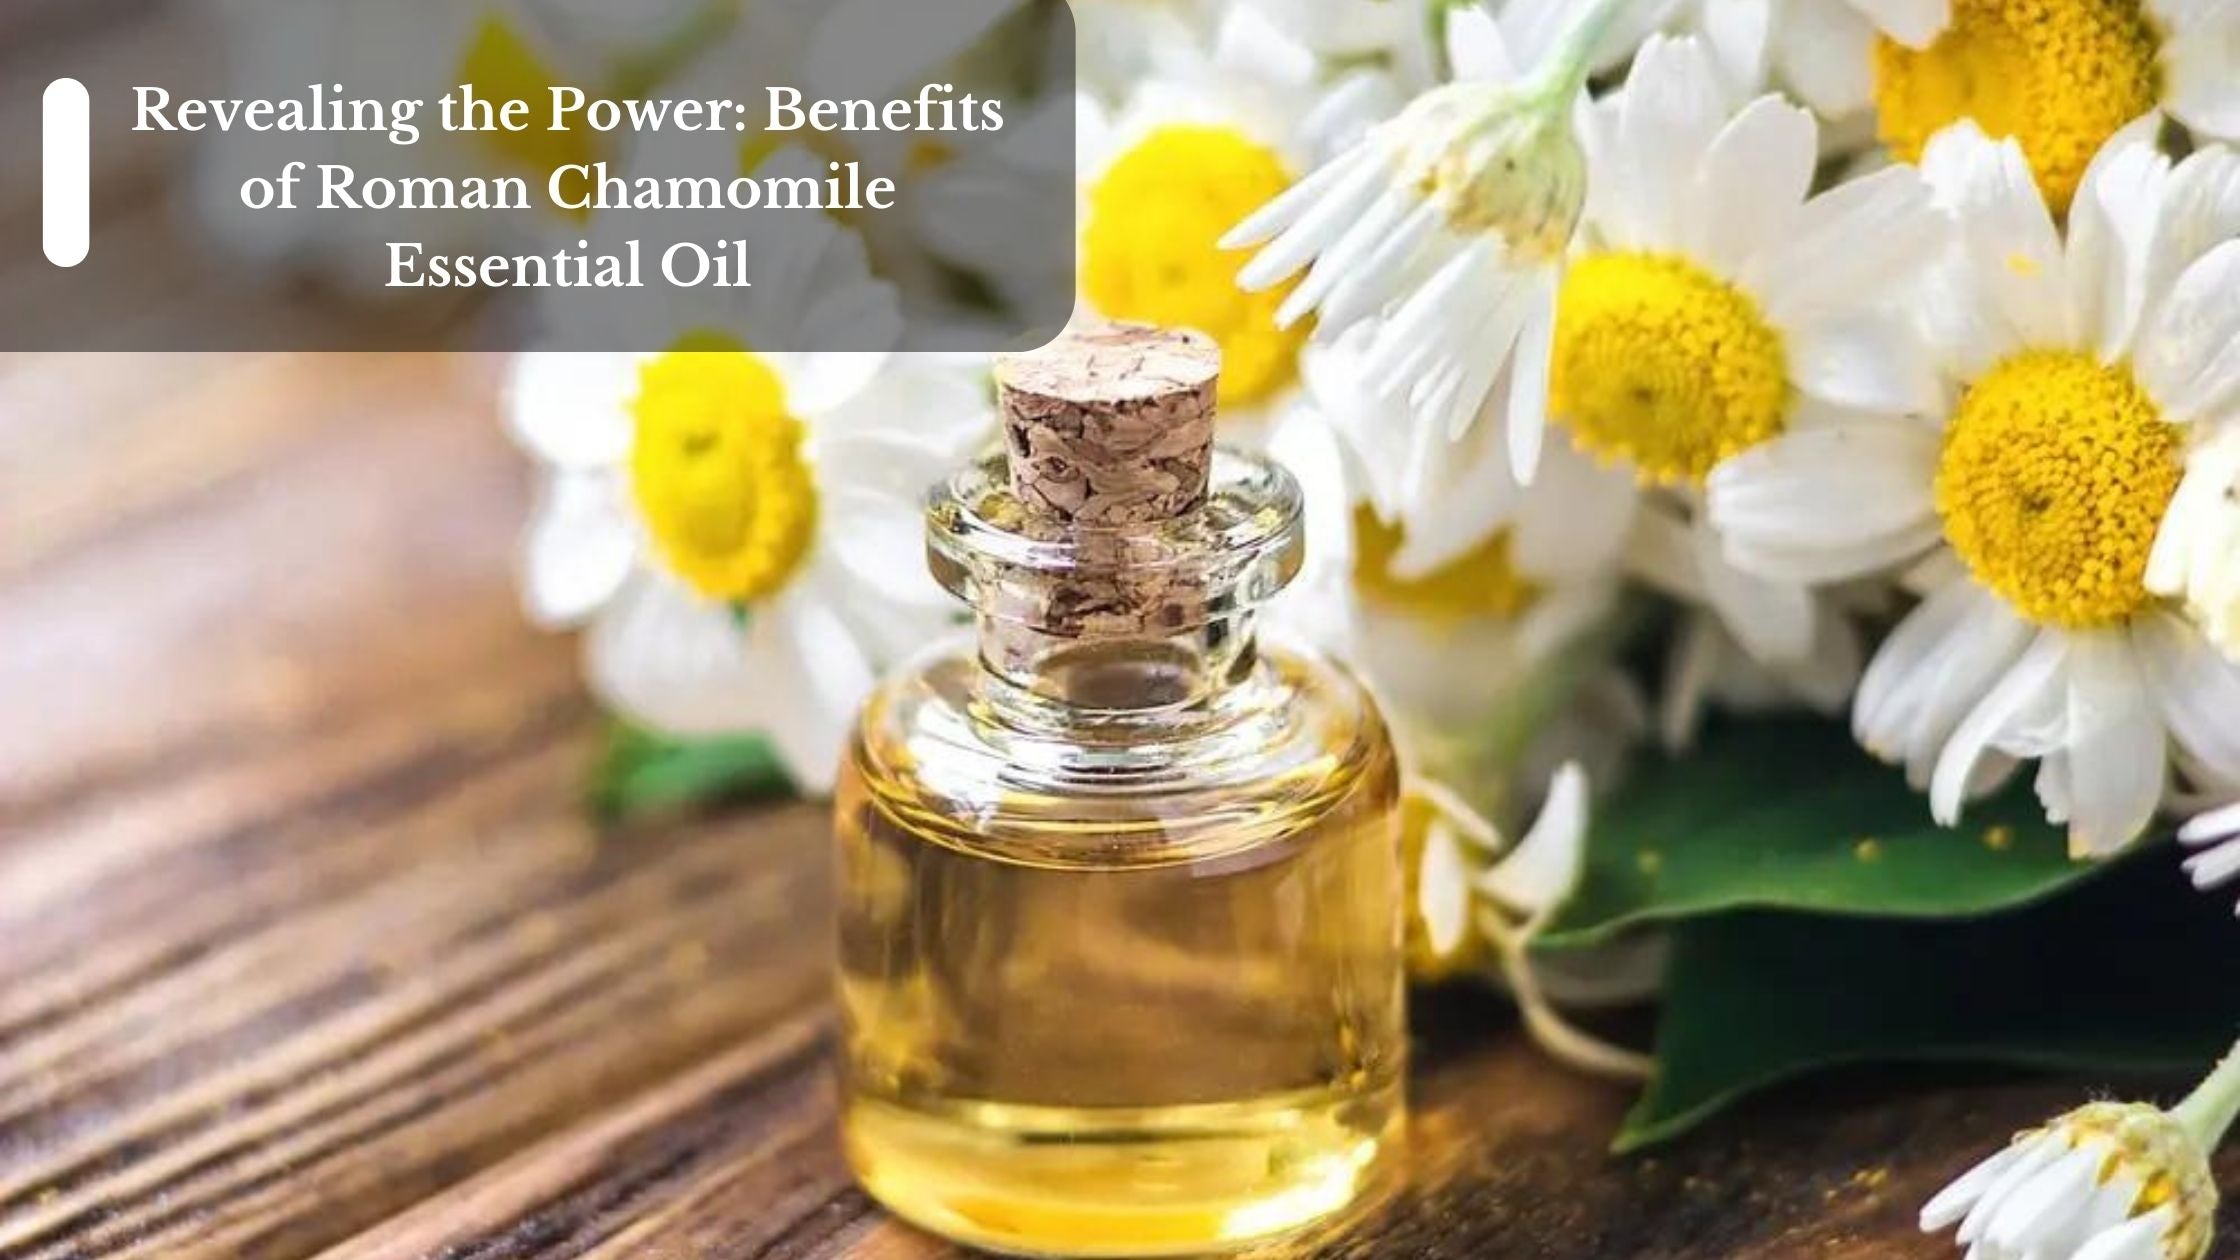 Roman Chamomile Oil Uses and Benefits